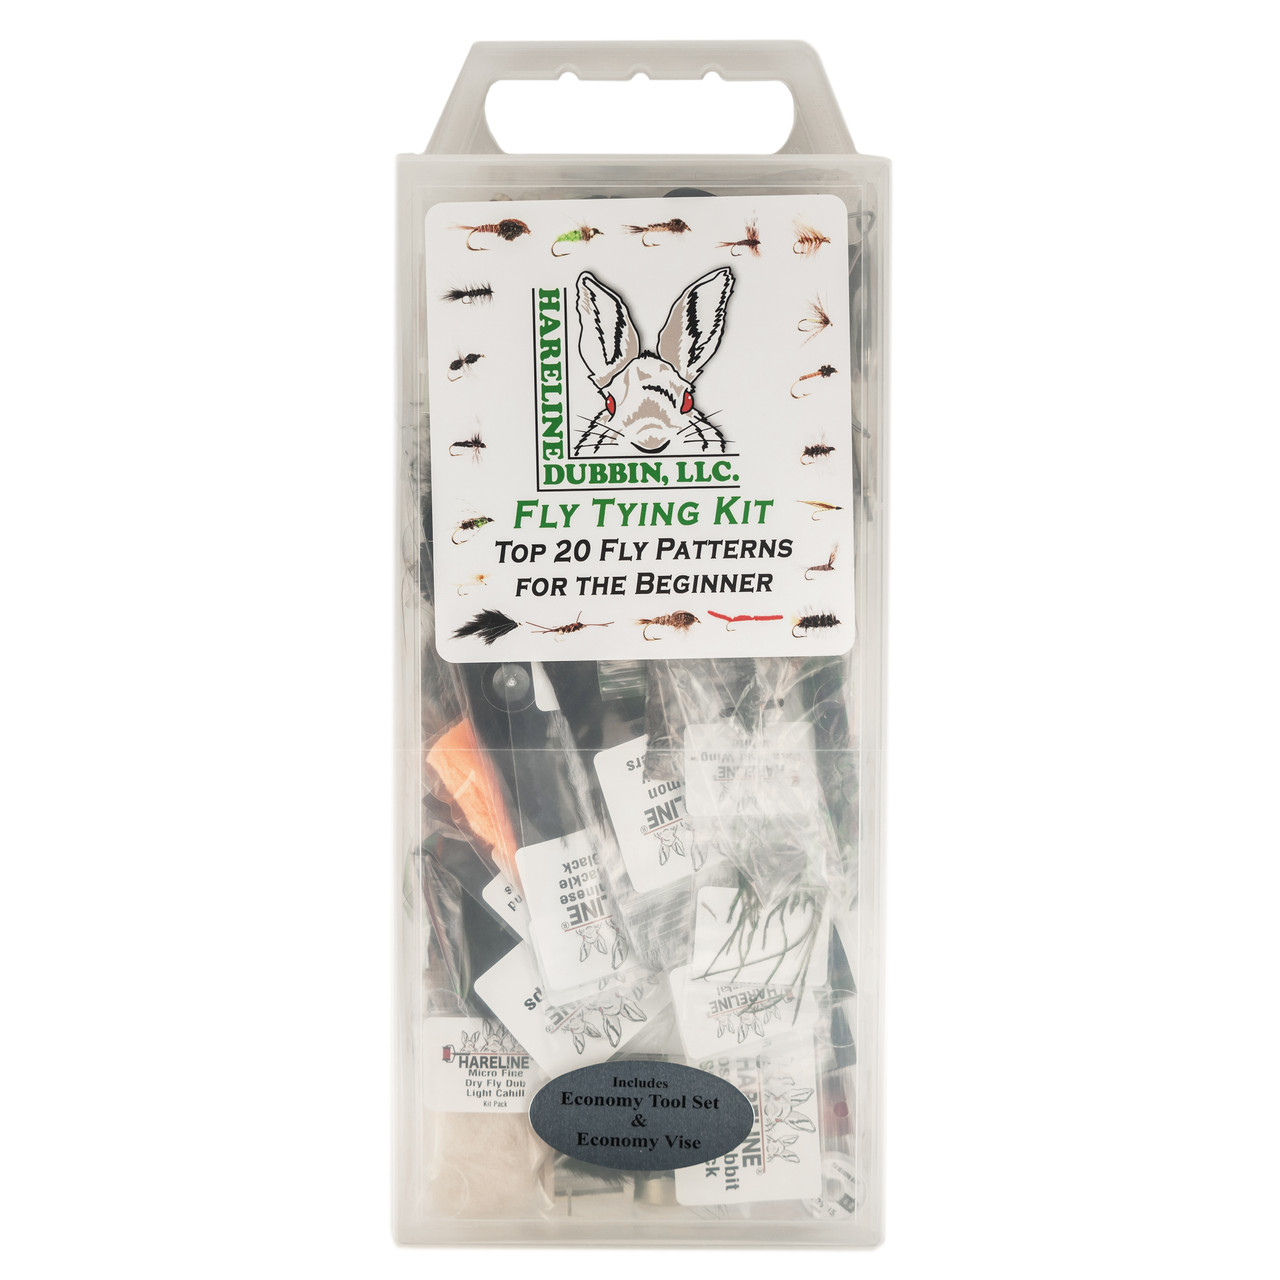 Hareline Fly Tying Materials Kit with Economy Tools and Vise 